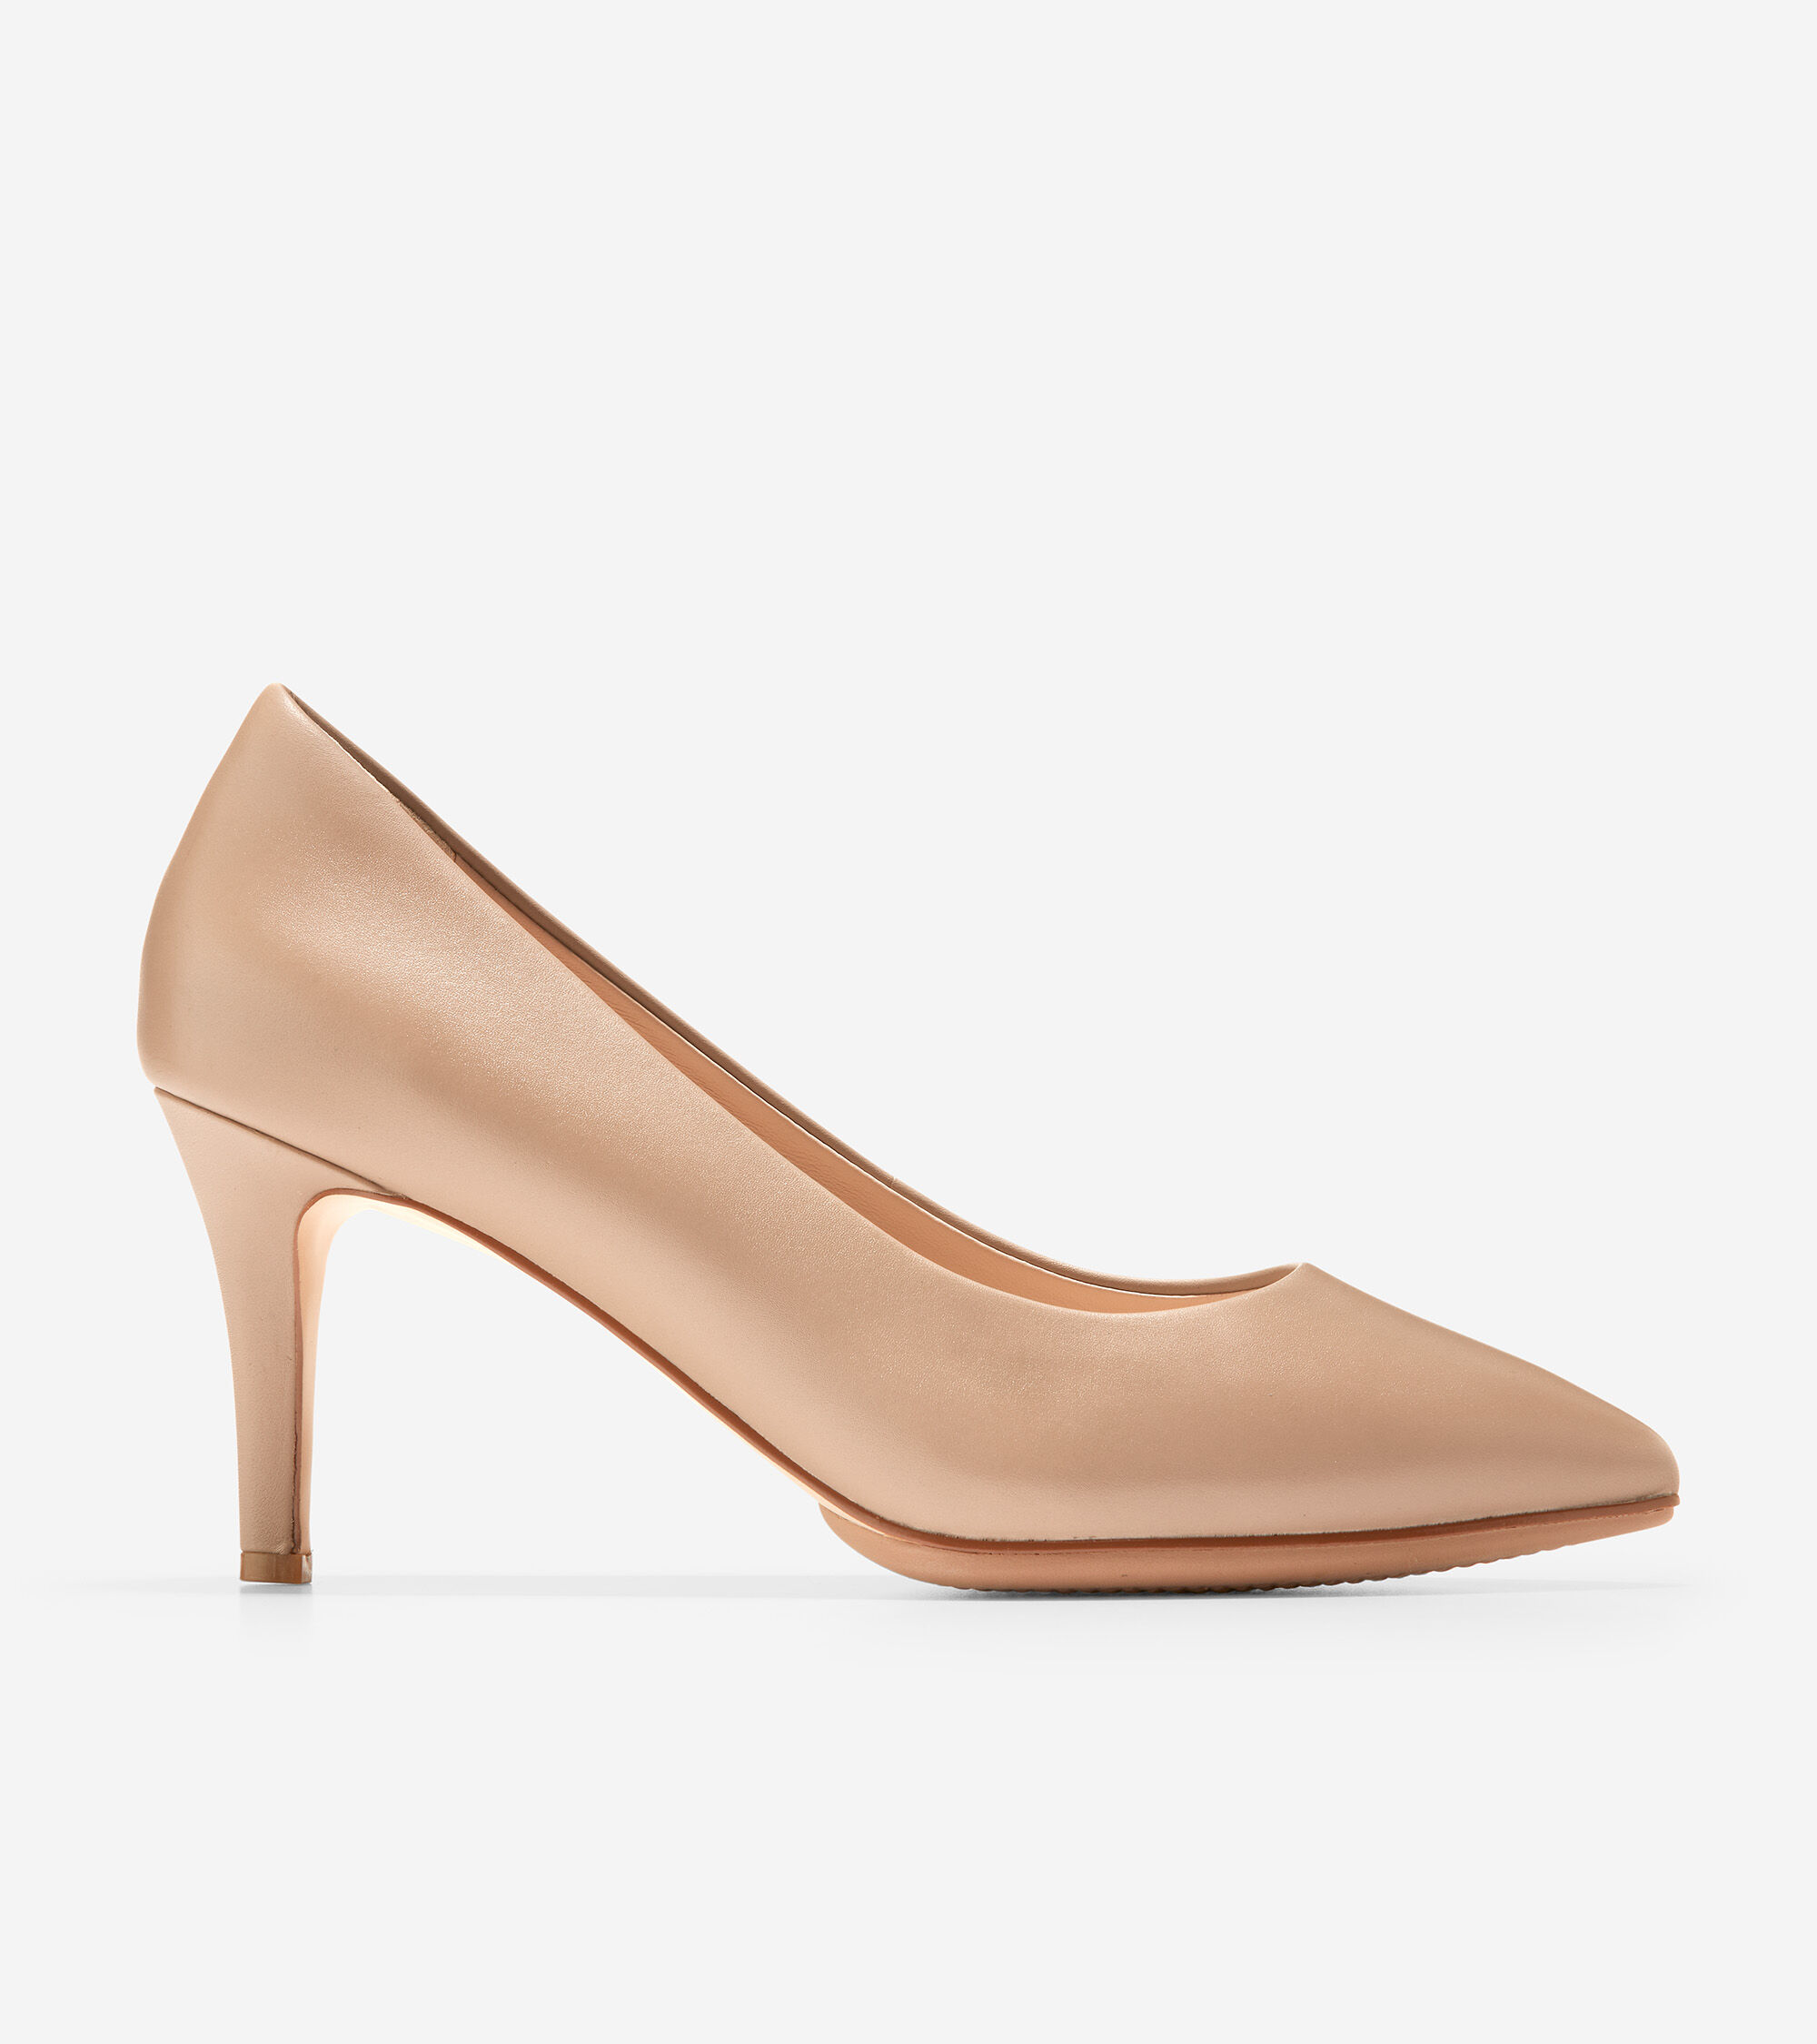 Women's Women's Grand Ambition Pump in Amphora Leather | Cole Haan